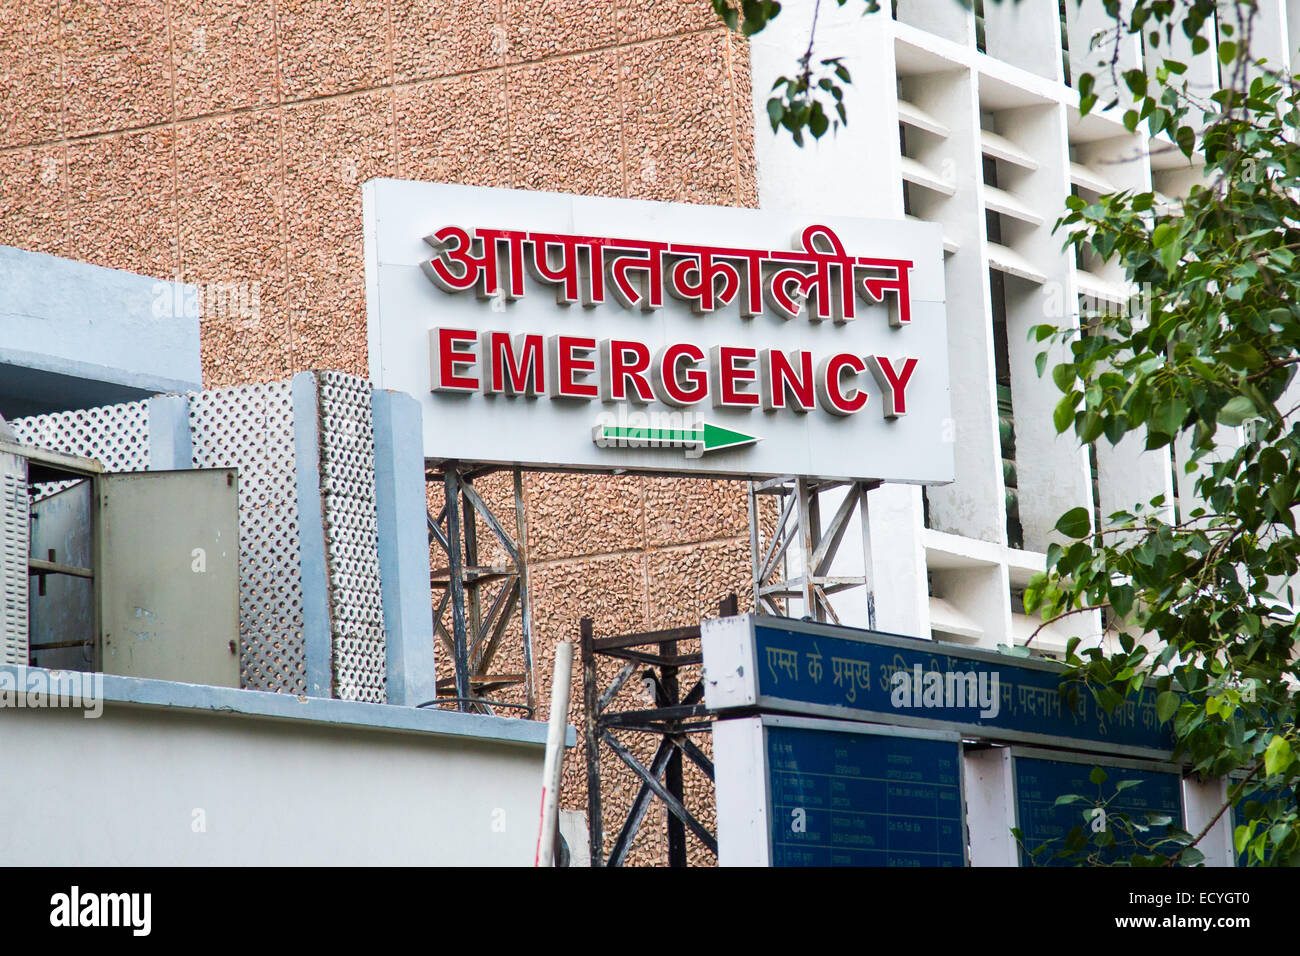 Emergency, All India Institute of Medical Sciences or AIIMS Hospital, Delhi, India Stock Photo